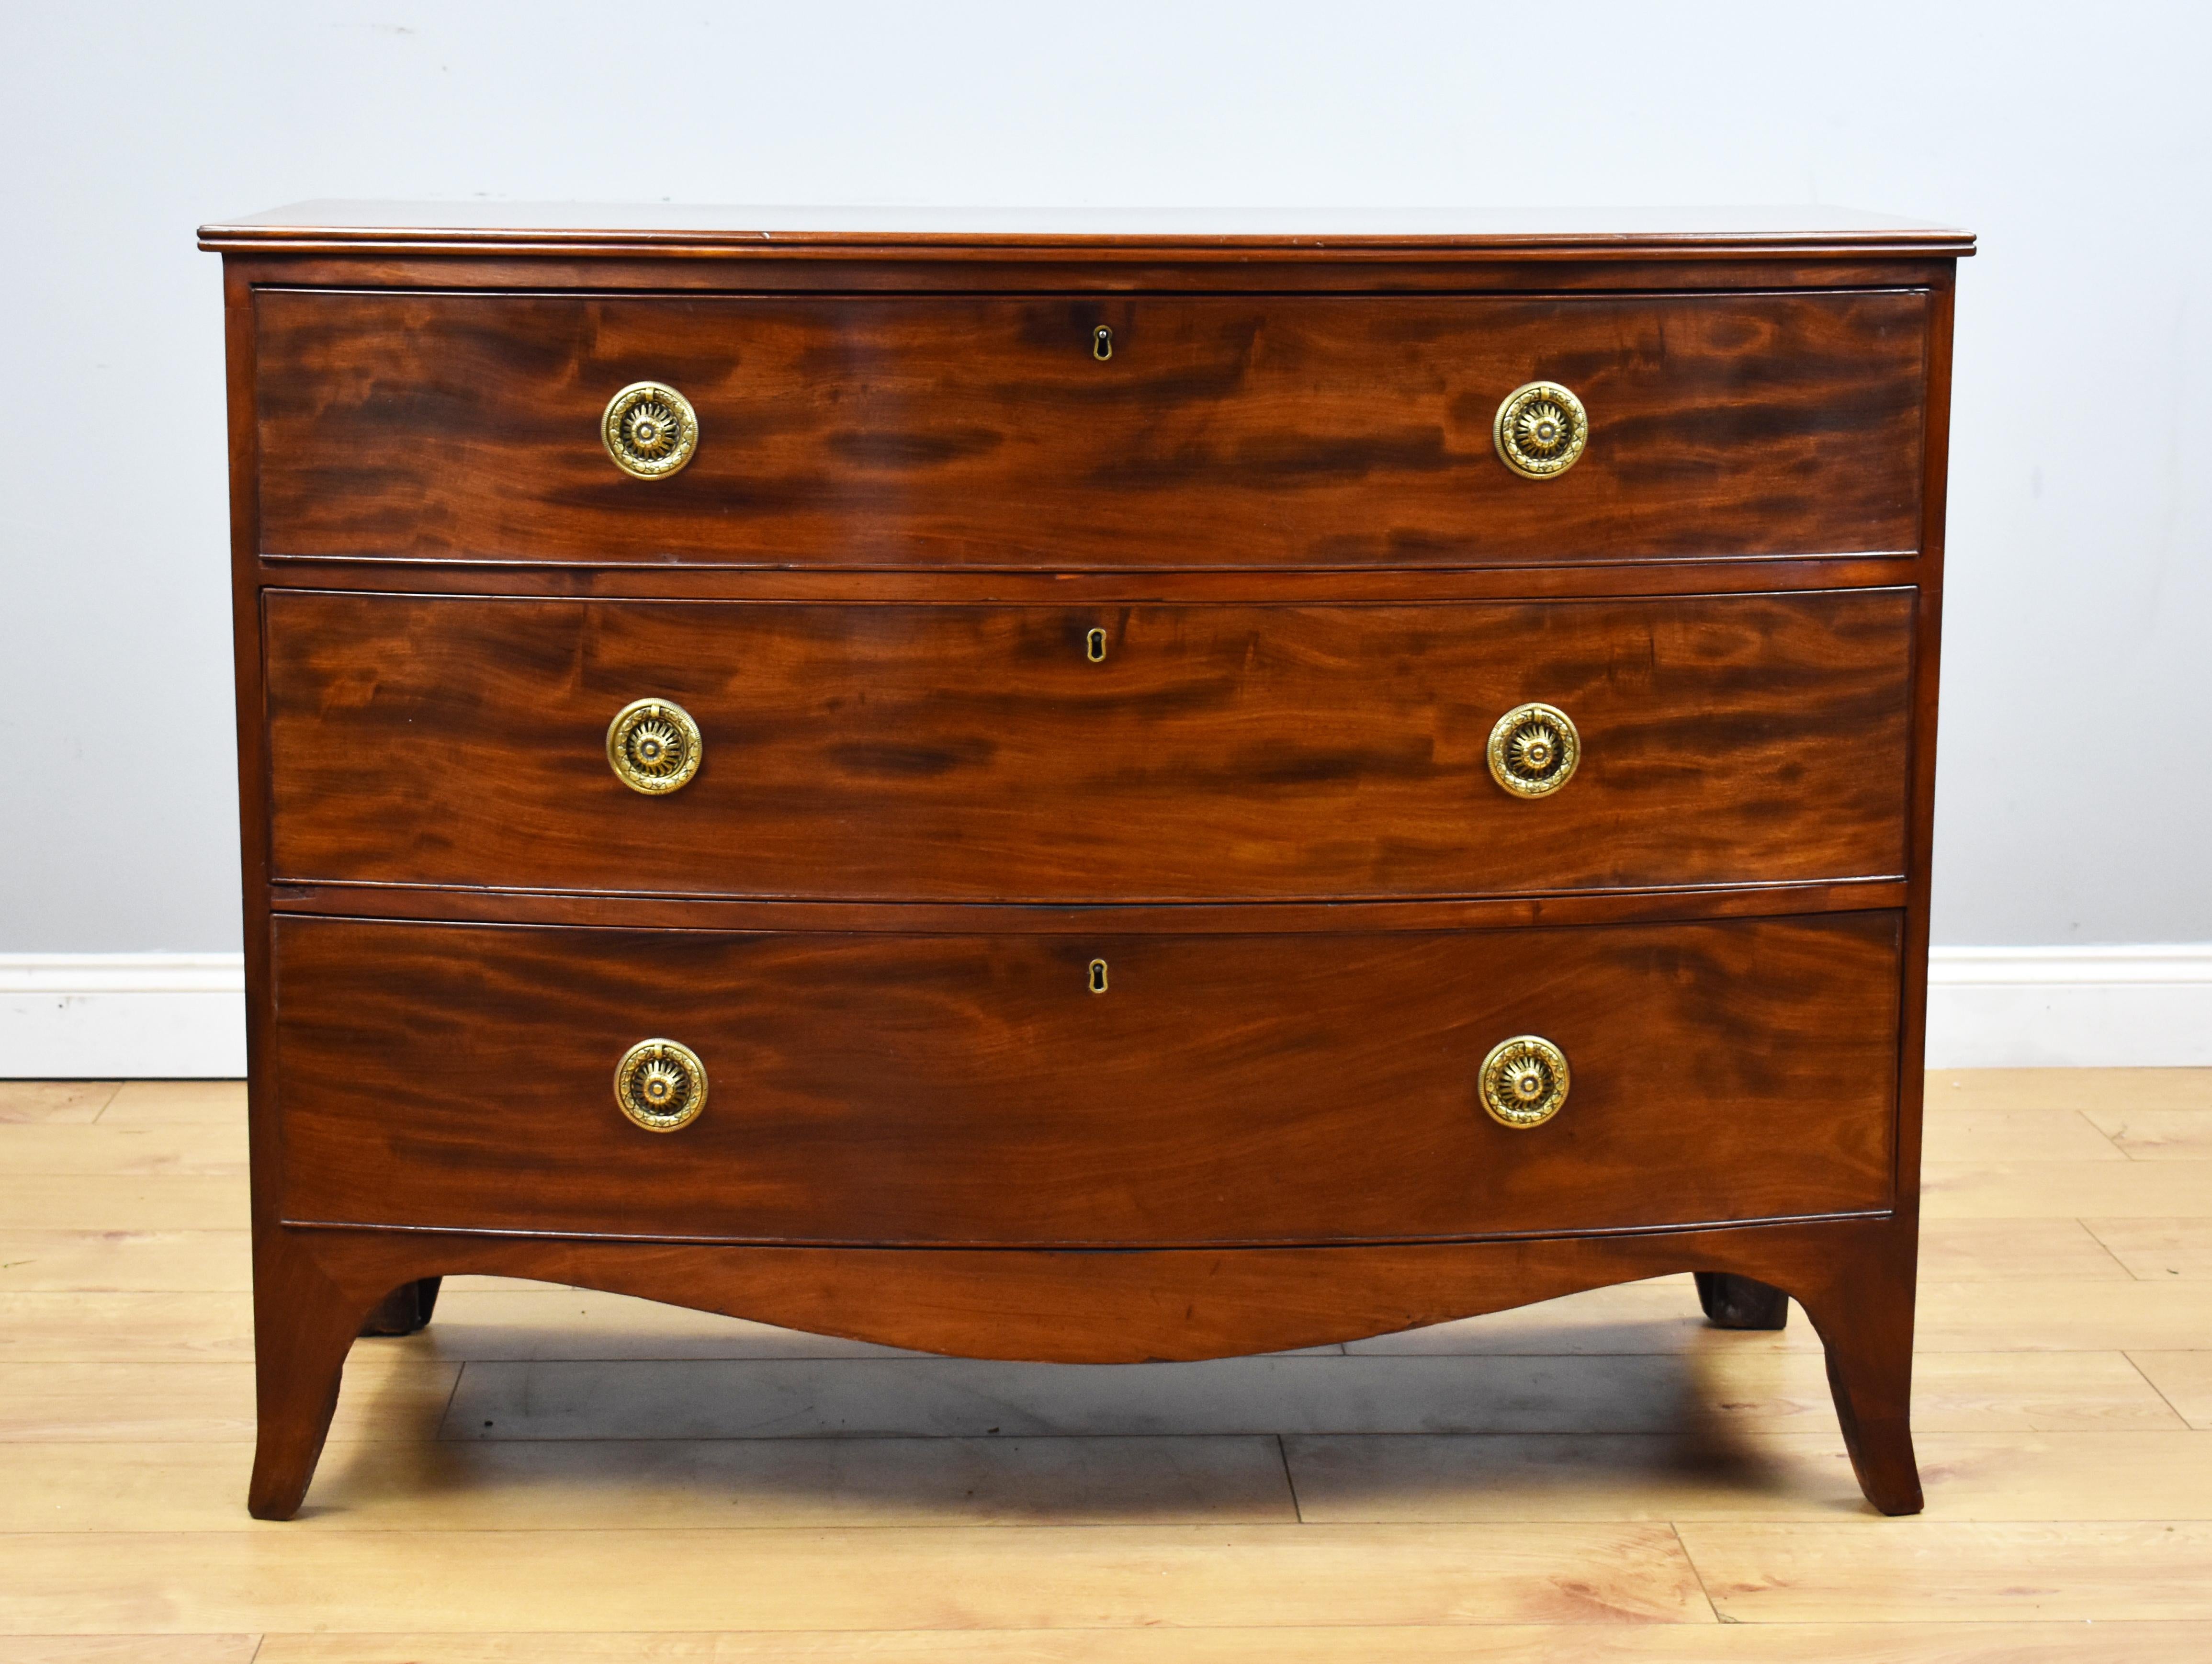 For sale is a good quality Regency mahogany bow front chest of drawers, having three graduated drawers, each with brass handles and escutcheons, above a shaped frieze, standing on splayed feet. The chest in very good condition, showing minor signs